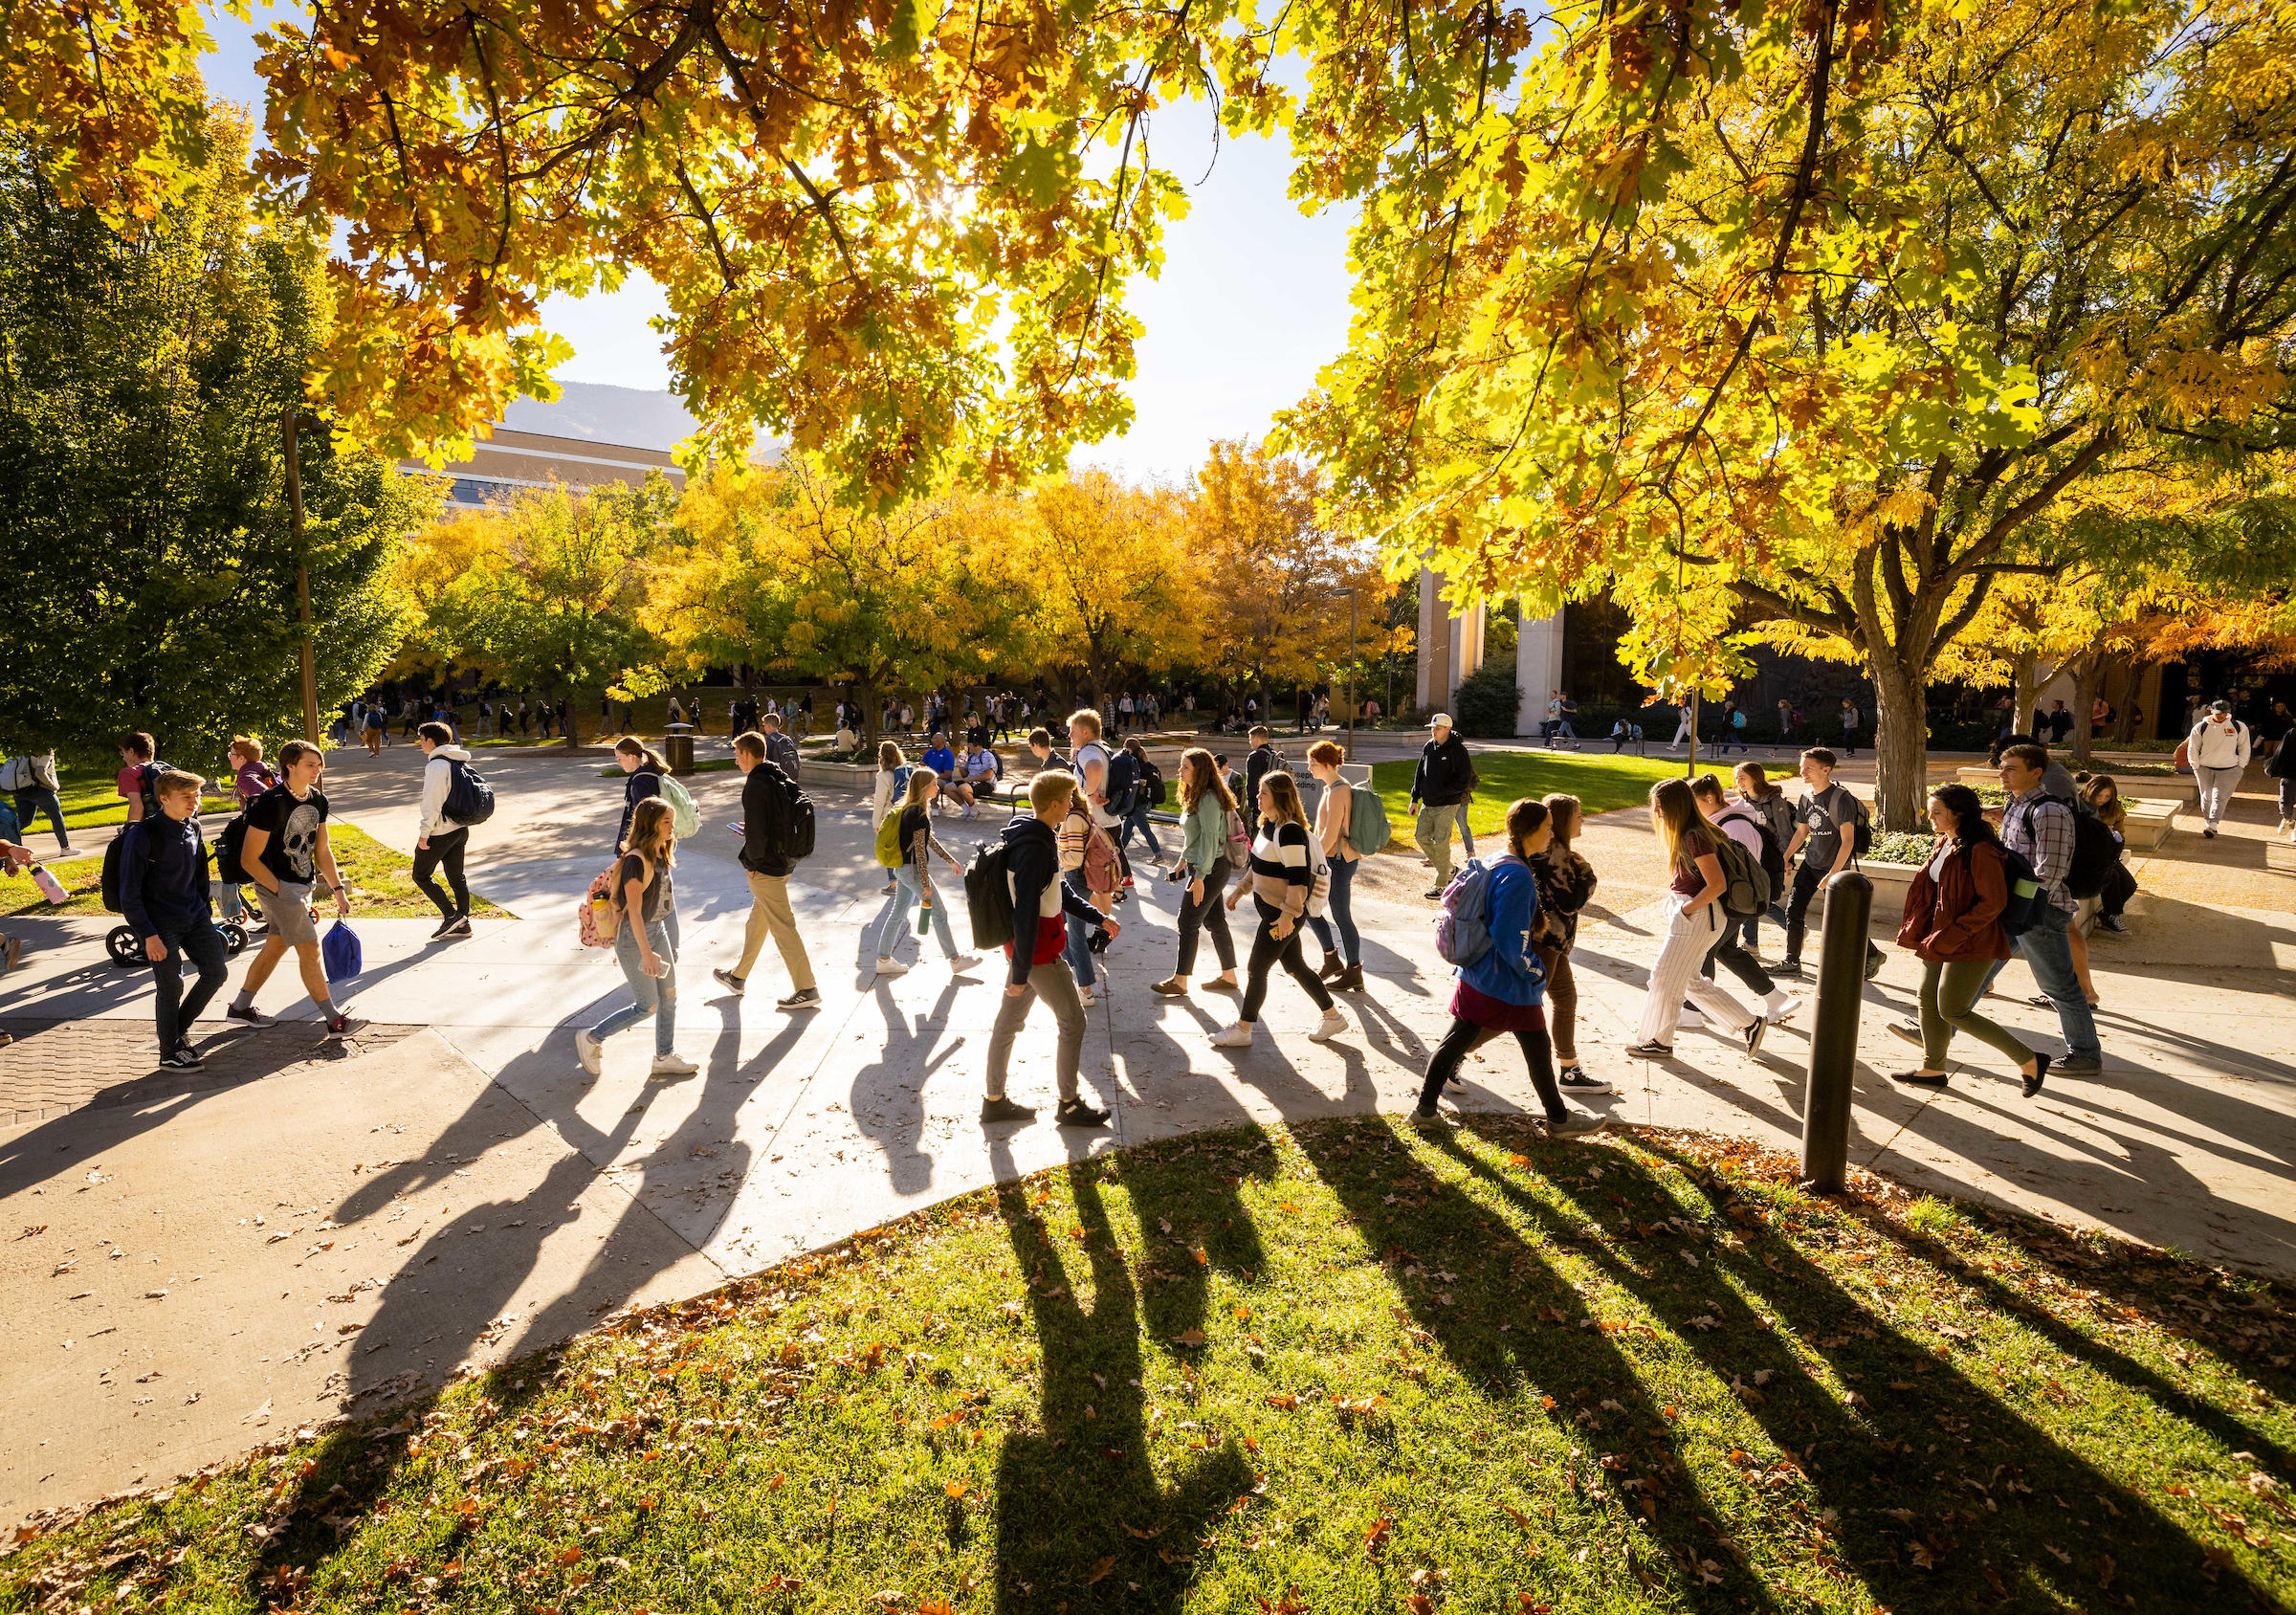 Panorama view of students walking across campus